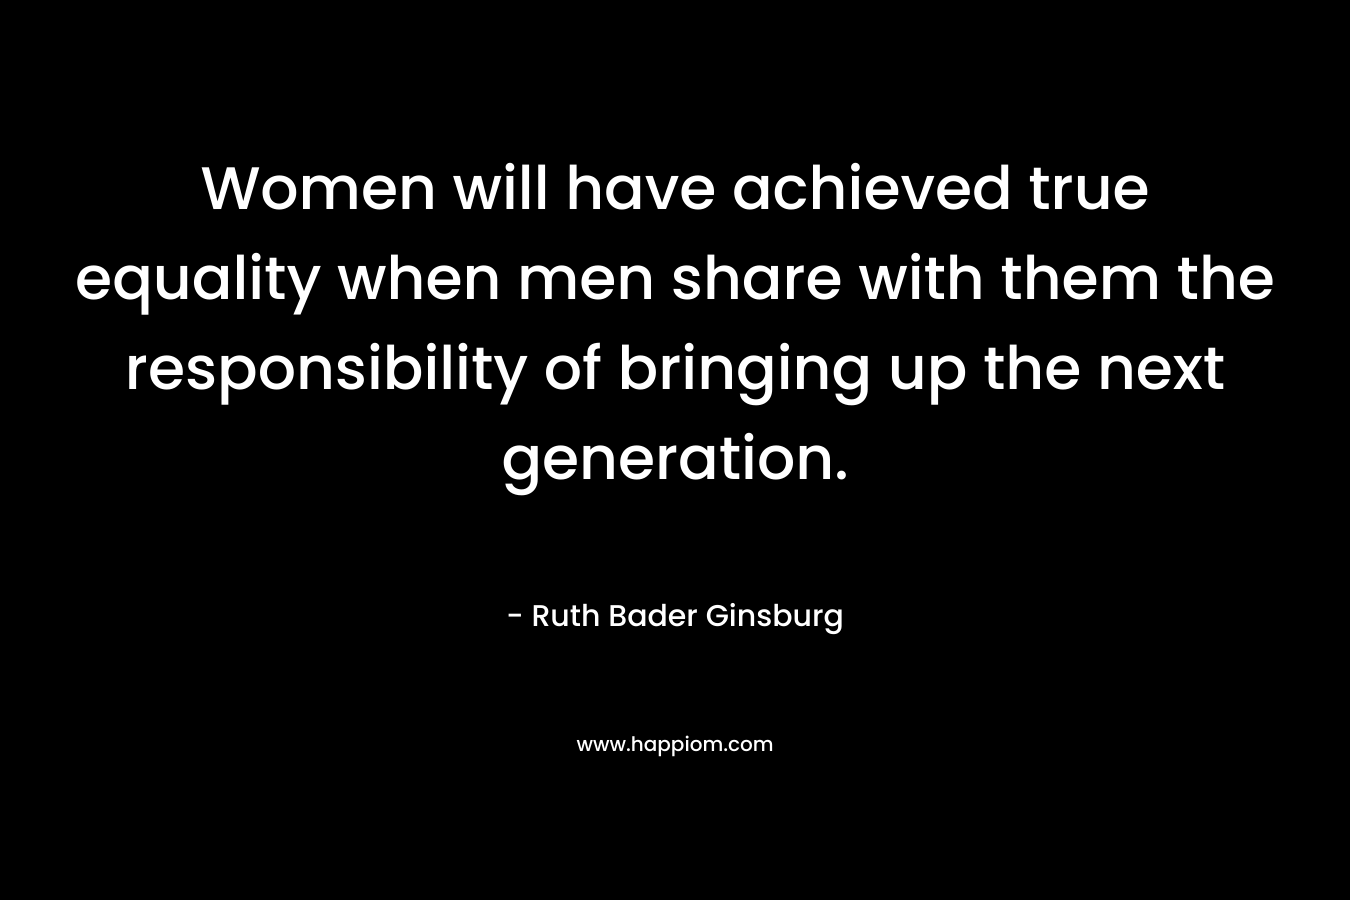 Women will have achieved true equality when men share with them the responsibility of bringing up the next generation. – Ruth Bader Ginsburg